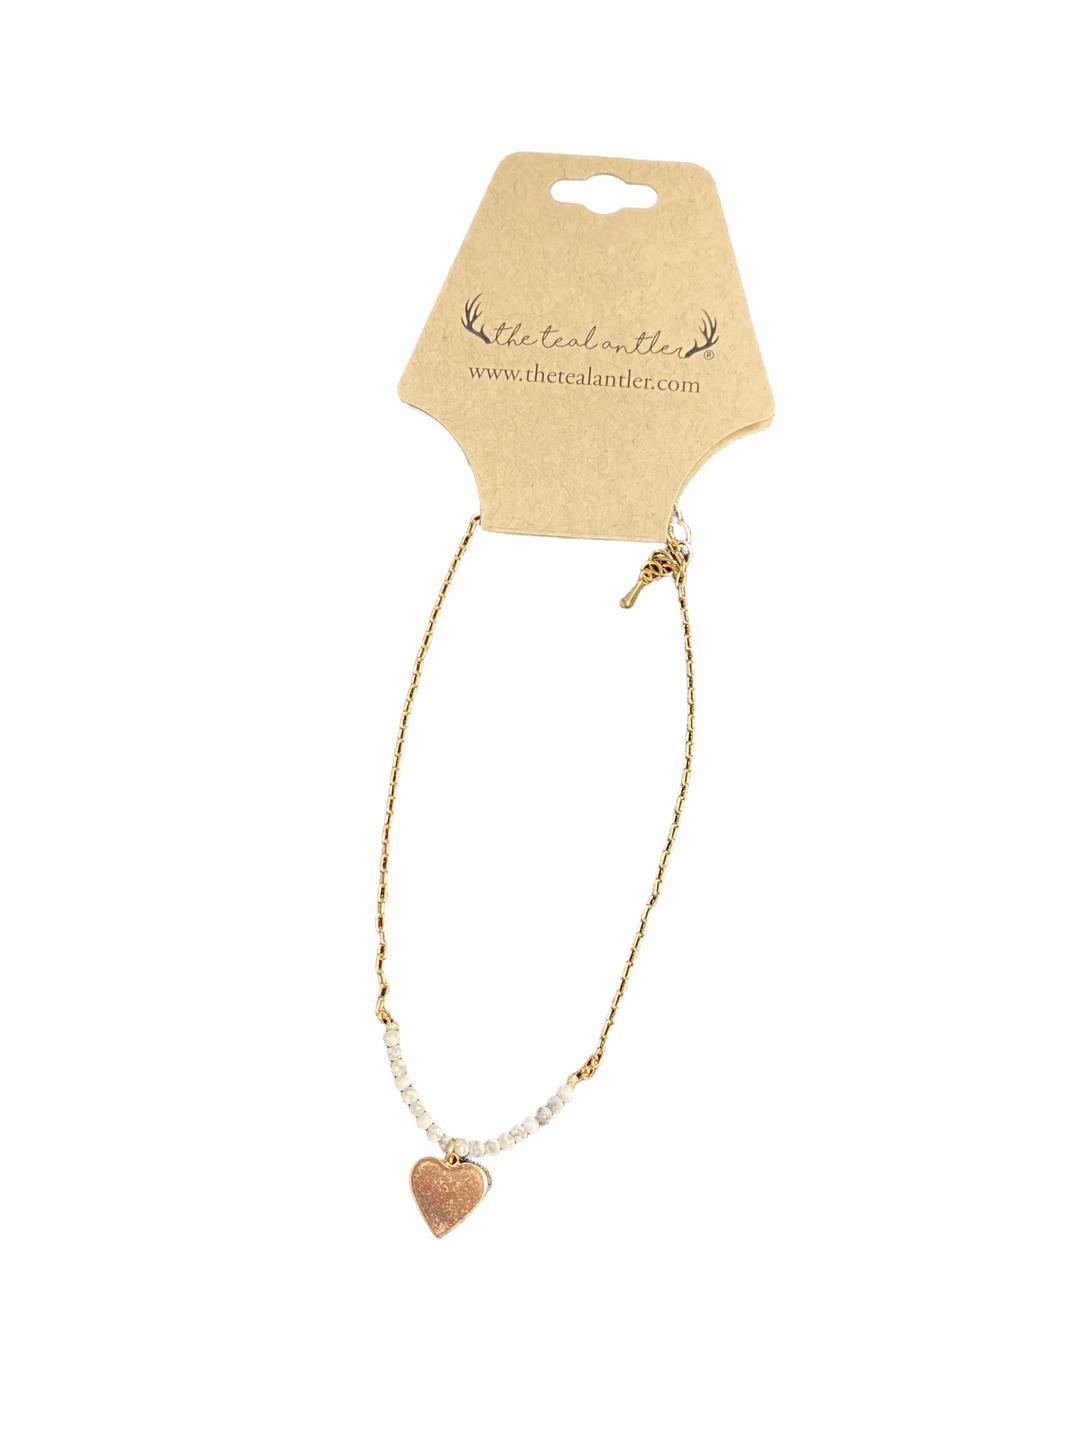 Beaded Gold Charm Anklet - The Teal Antler Boutique